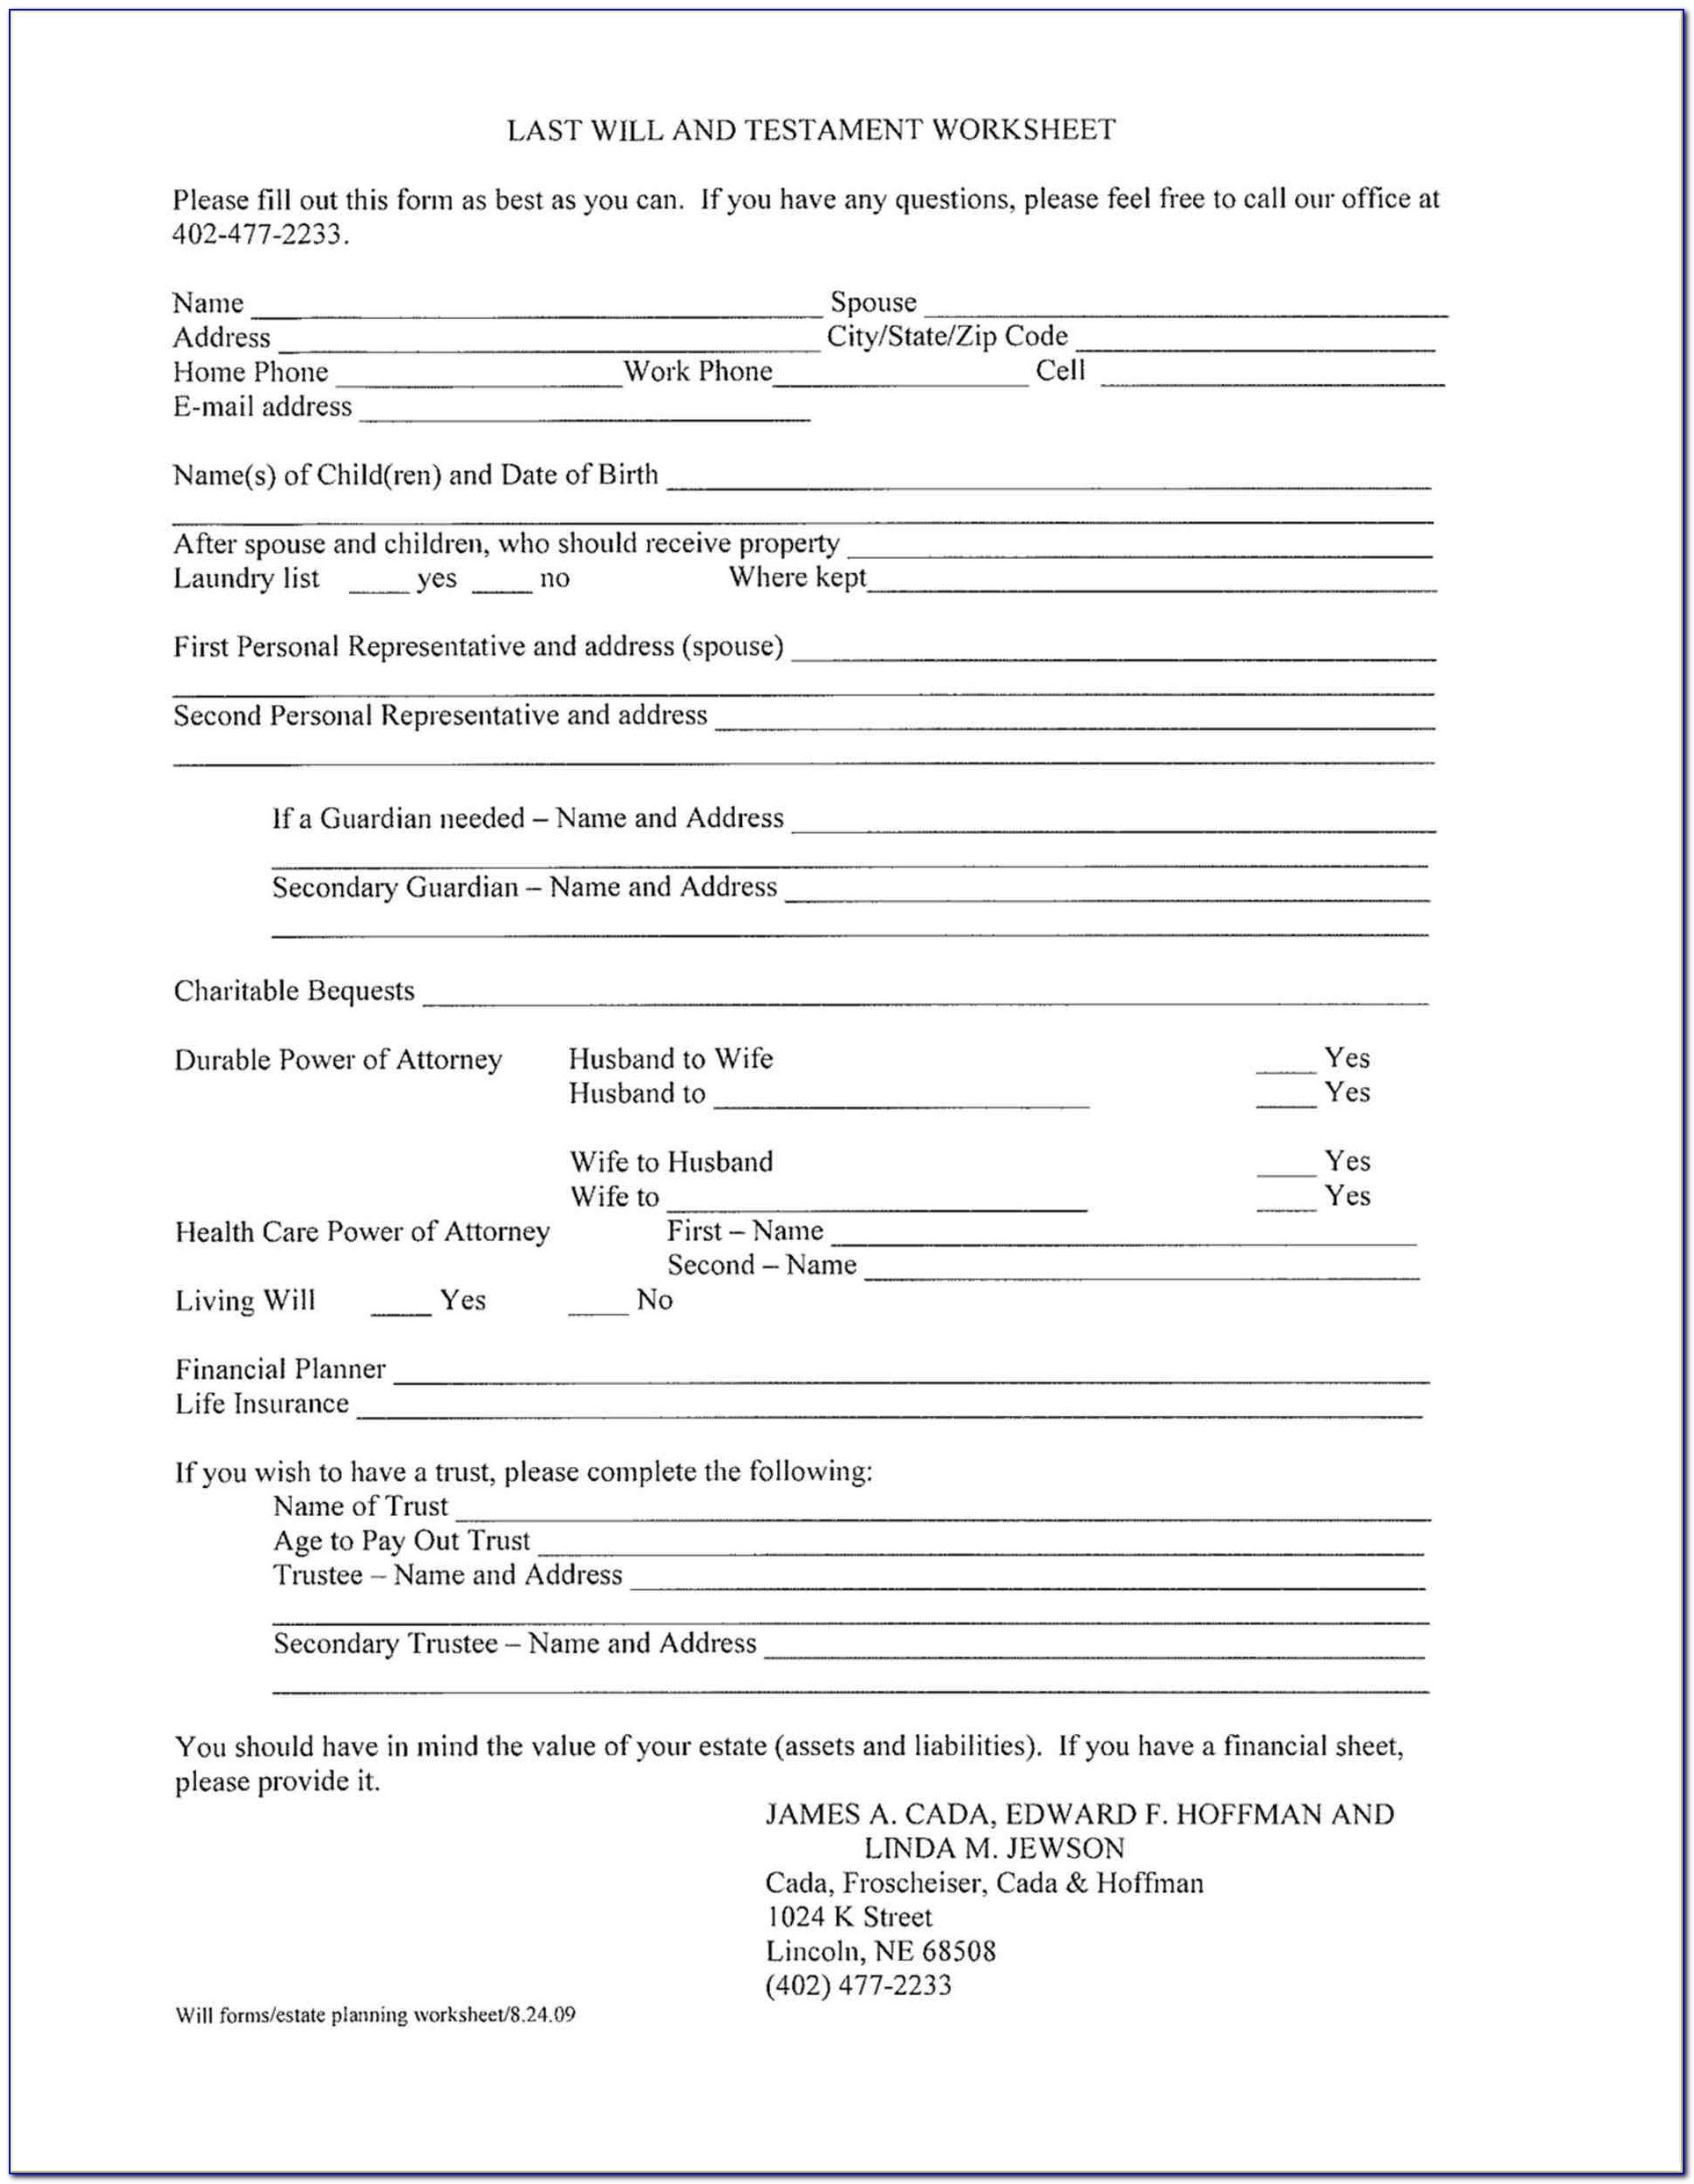 printable-will-forms-florida-printable-forms-free-online